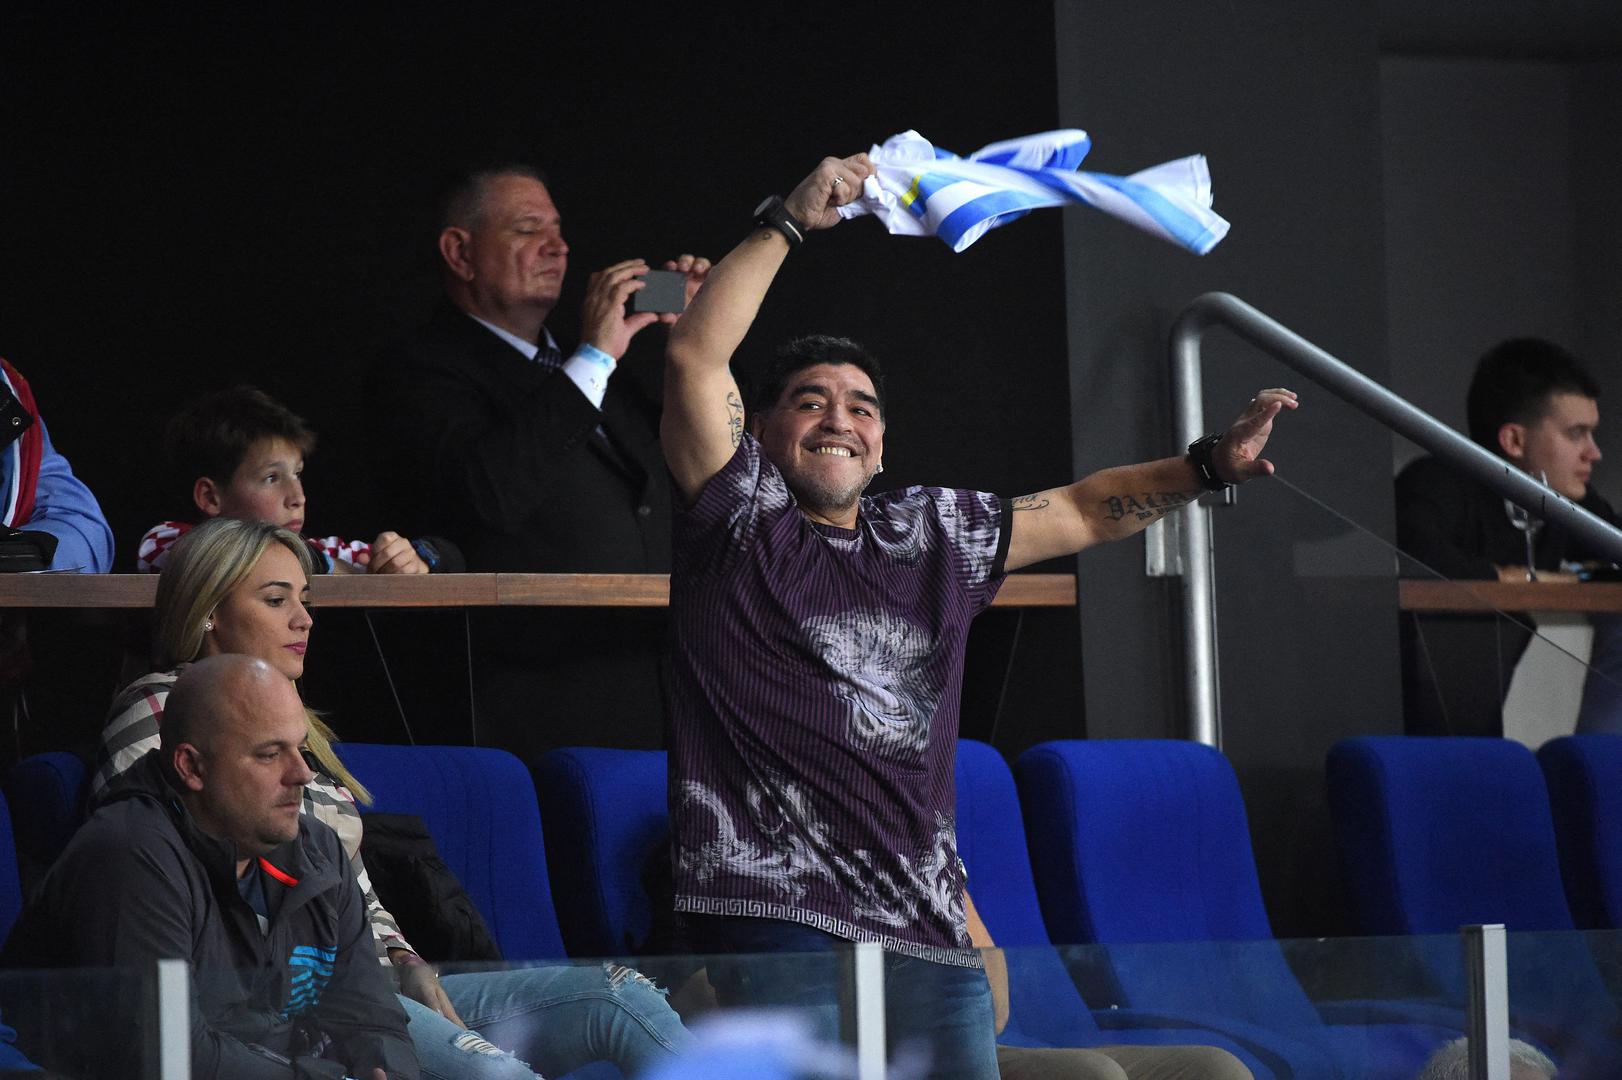 Football Legend Maradona Dies Aged 60 File photo - Former Argentinian soccer player Diego Maradona attends the double match at the Davis Cup final tie between Croatia and Argentinia at the Arena, Zagreb, Croatia on november, 26, 2016. Diego Maradona has died from a heart attack just days after turning 60. The Argentinian football legend died at home, his lawyer said, just two weeks after having surgery on a blot clot in his brain. Widely regarded as one of the greatest players of all time on the pitch, his life off the pitch was equally notorious - amid battles with drug and alcohol addiction. Photo by Corinne Dubreuil/ABACAPRESS.COM Dubreuil Corinne/ABACA /PIXSELL